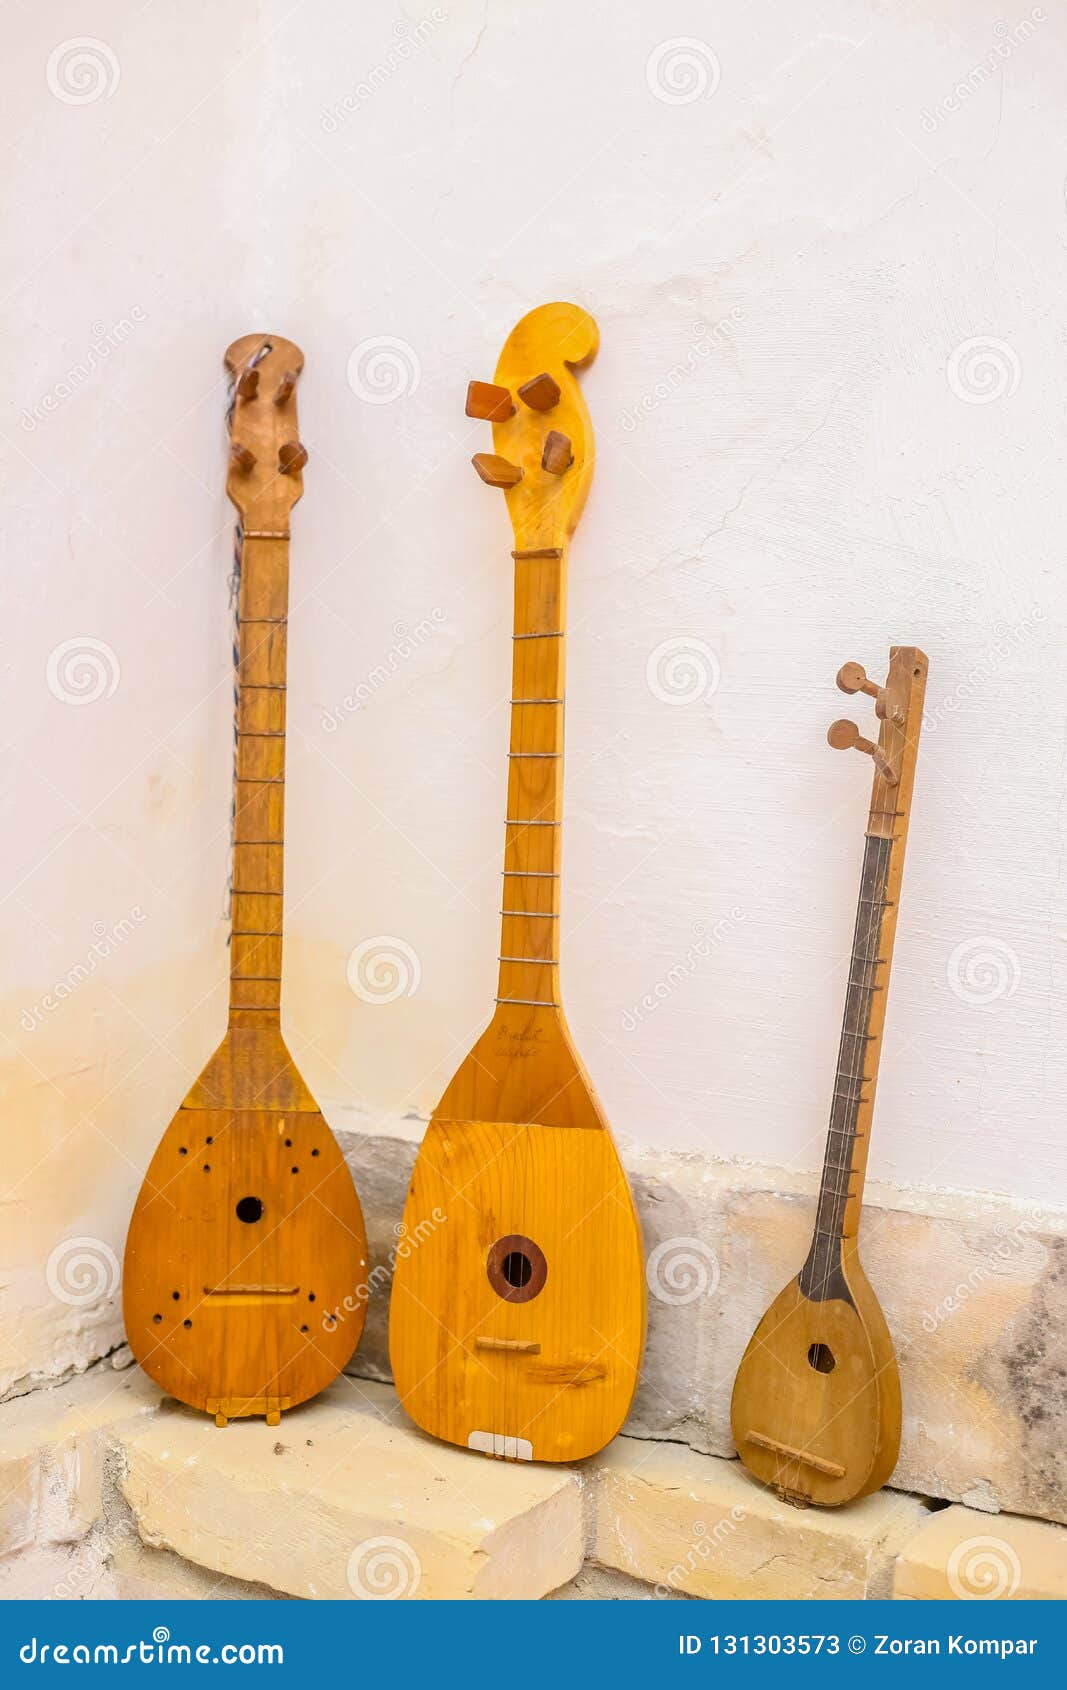 Instrument Tamburica Photos - Free & Royalty-Free Stock Photos from  Dreamstime